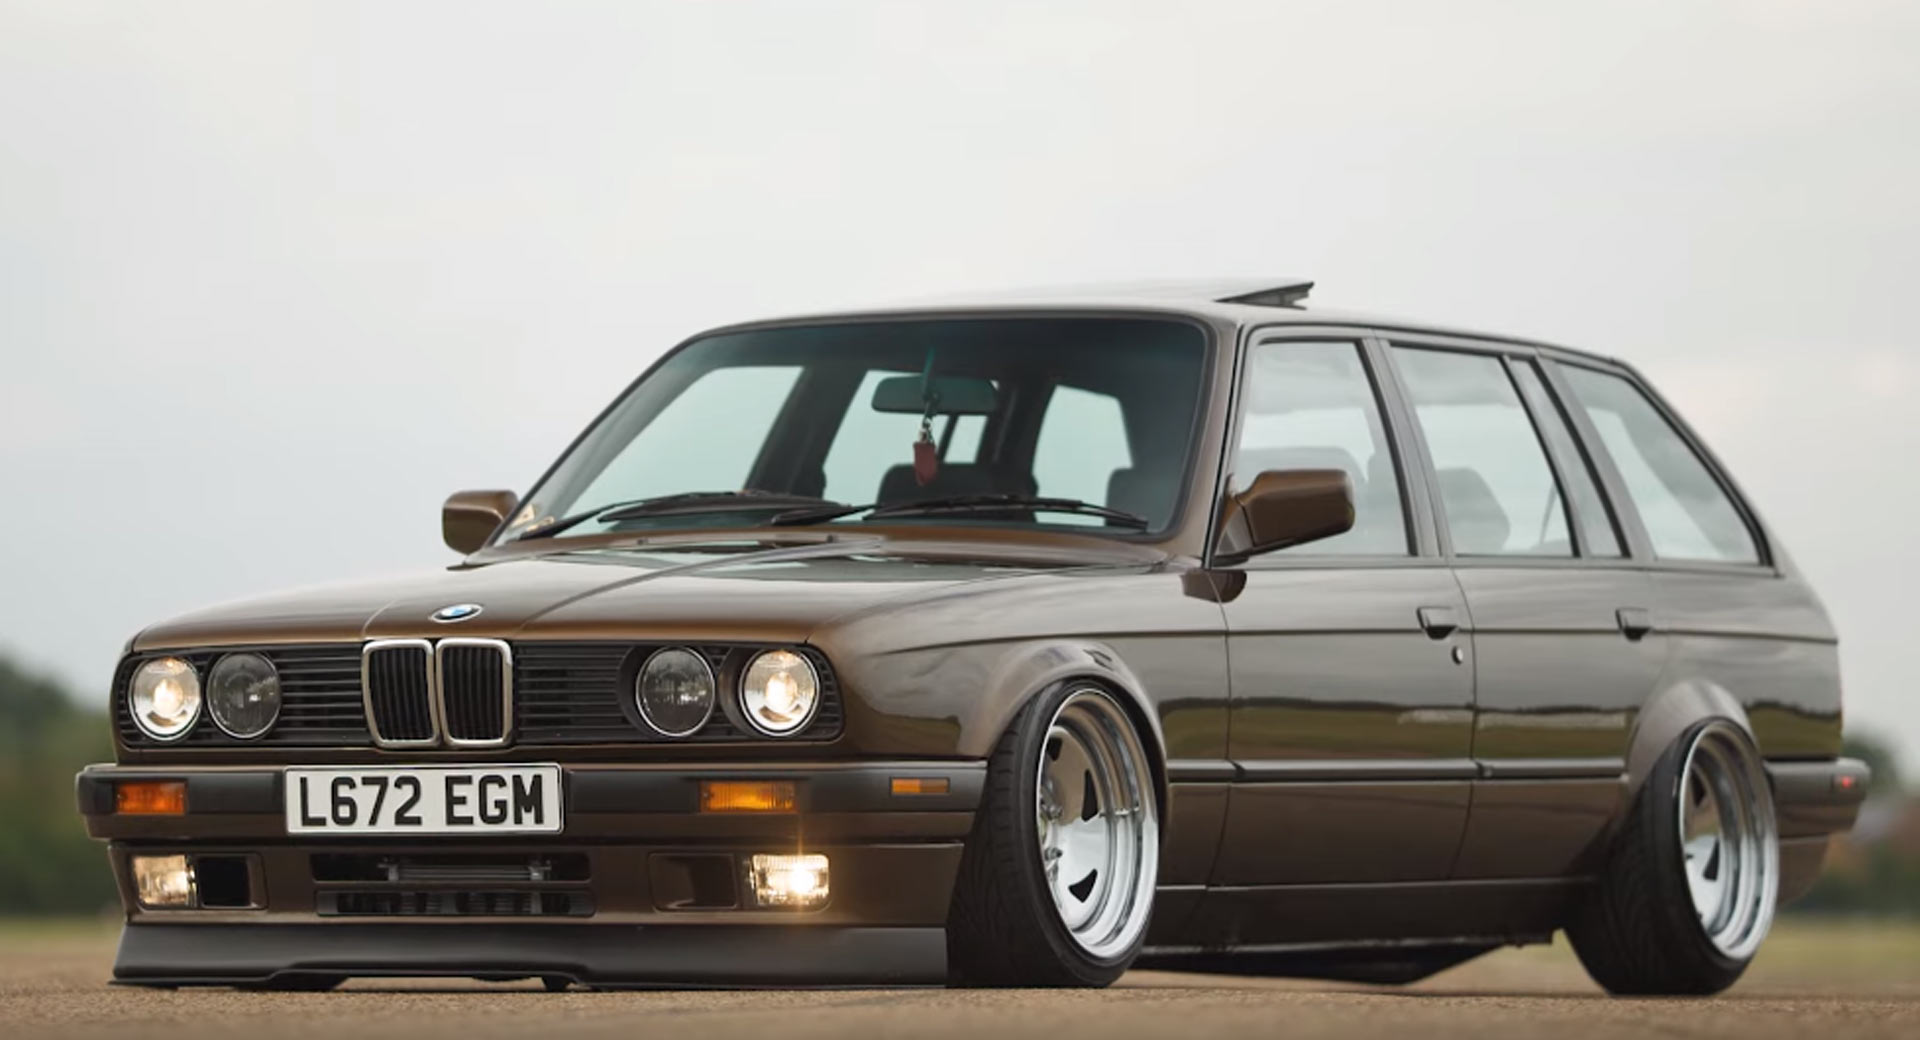 Ever Seen A Brown BMW E30 3-Series Wagon With A Diesel Engine? | Carscoops